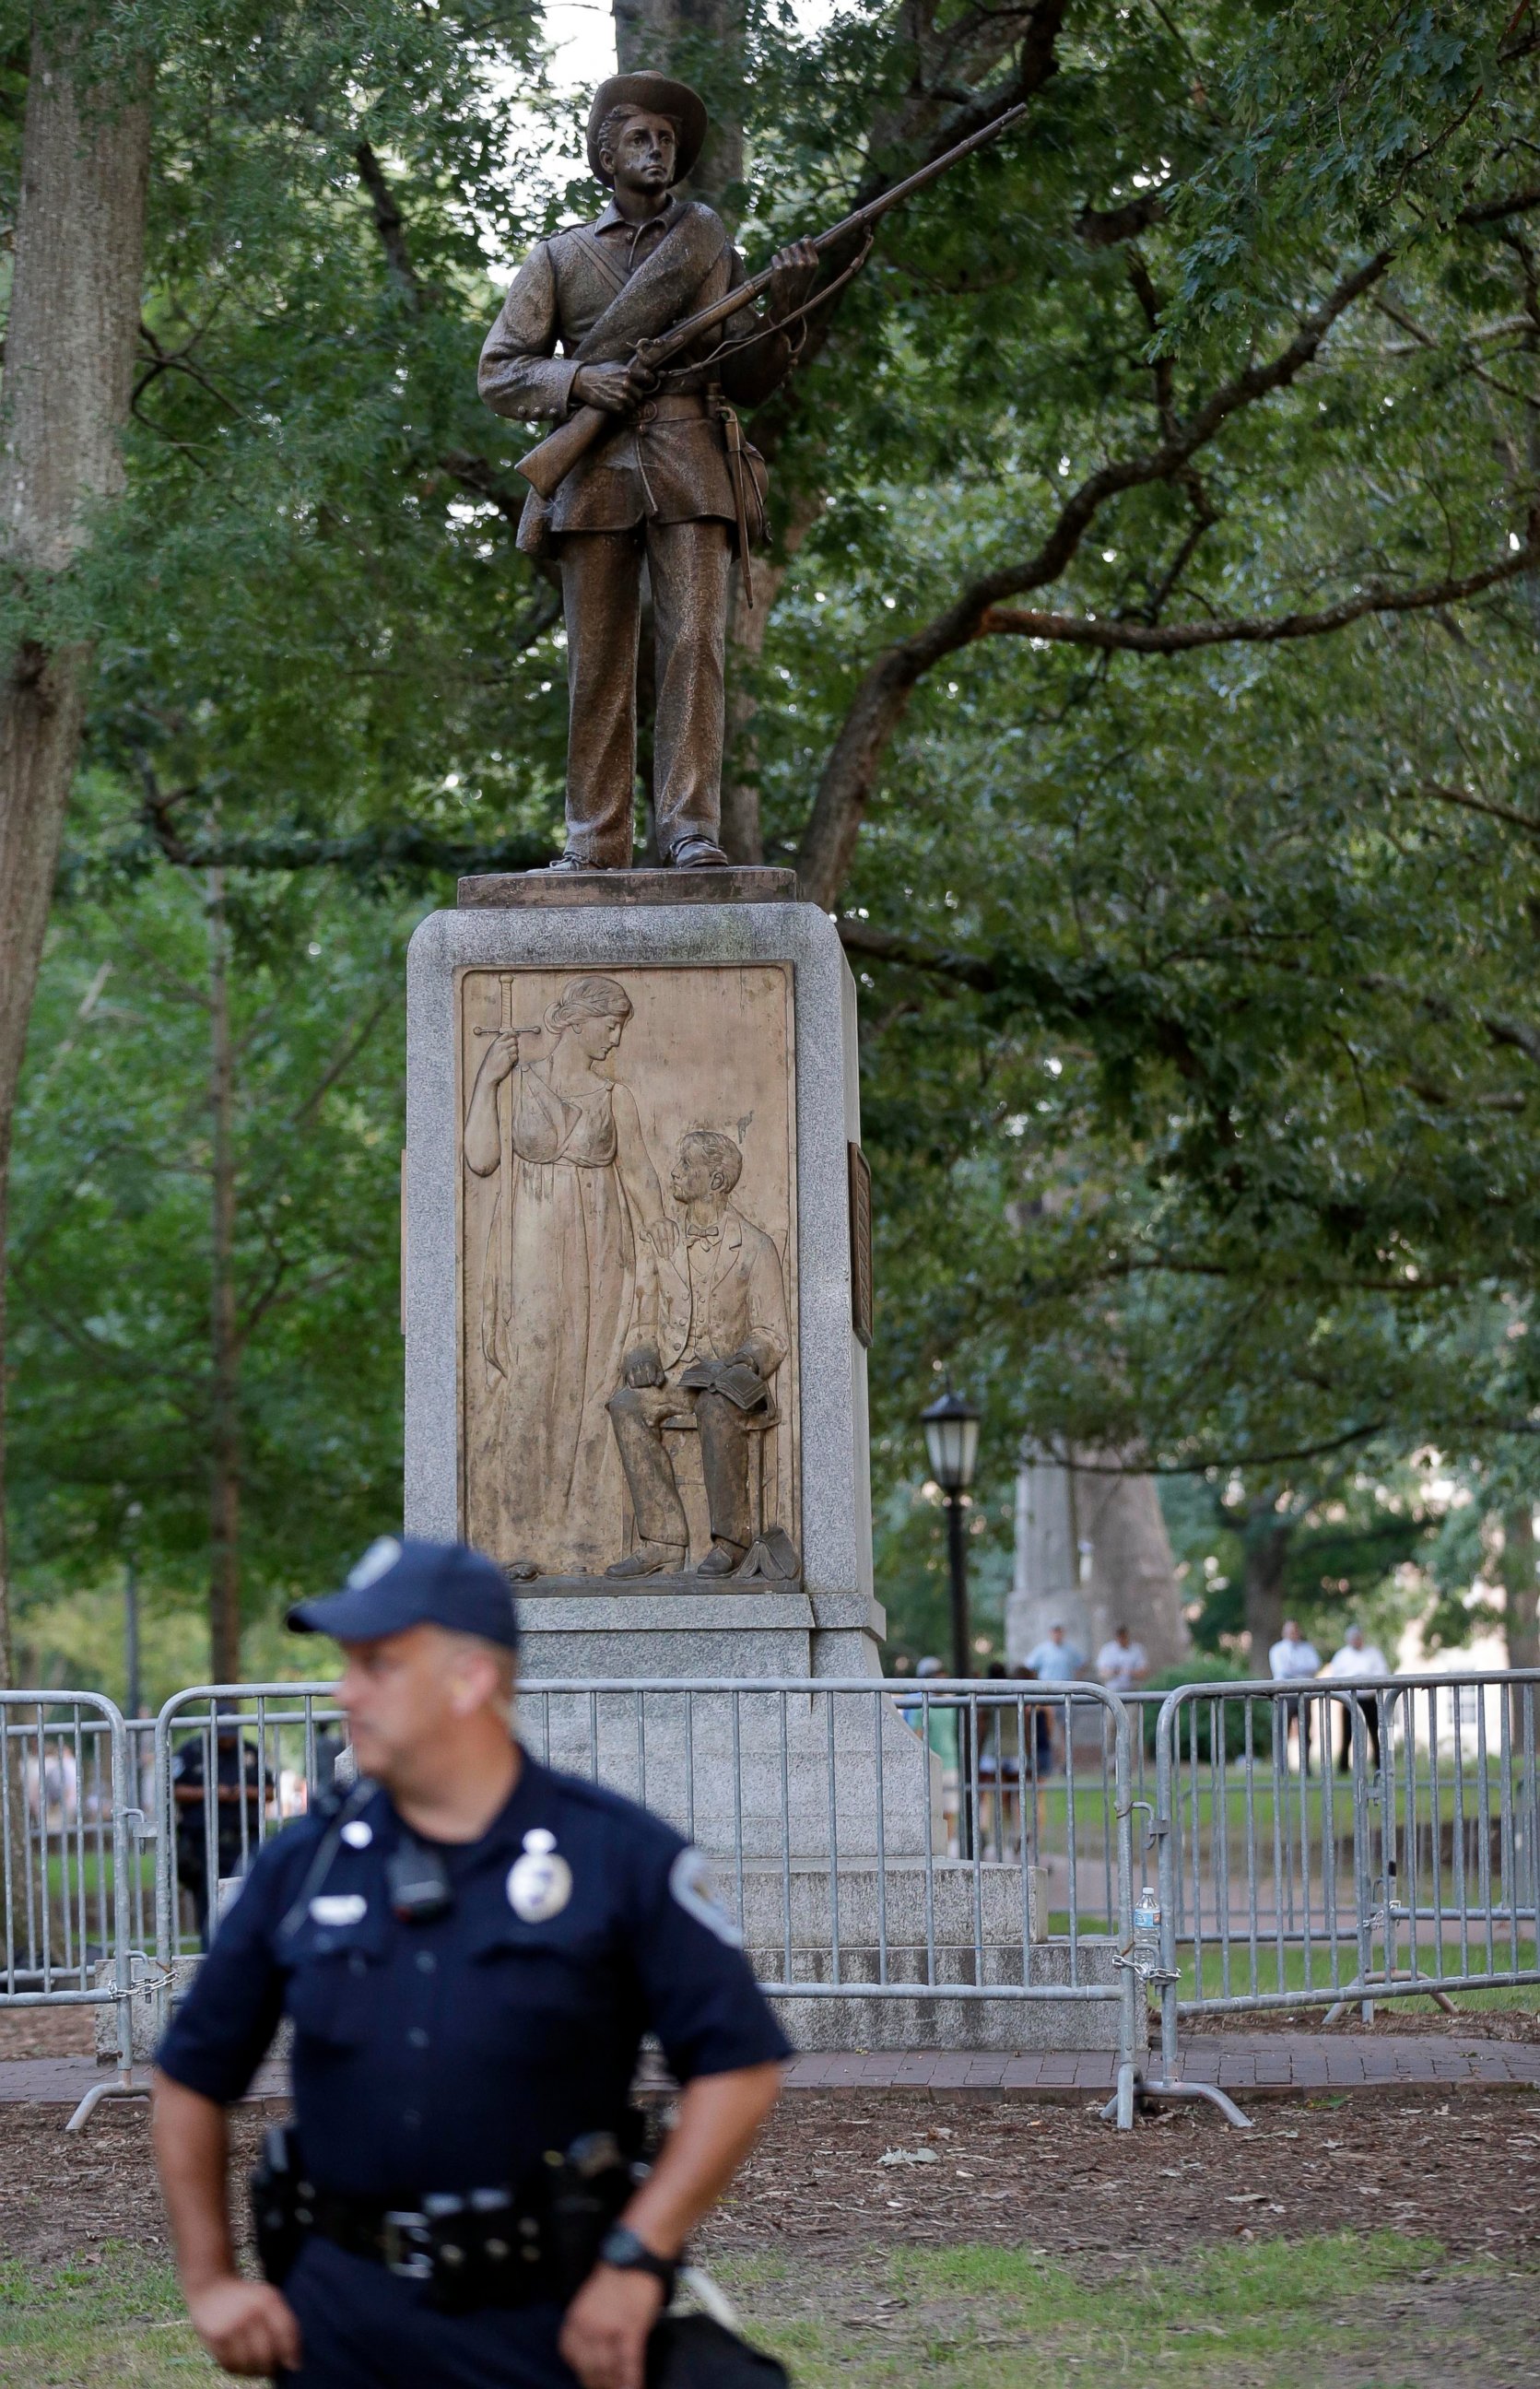 FILE - In this Aug. 22, 2017, file photo, police stand by a Confederate monument nicknamed "Silent Sam" at the University of North Carolina-Chapel Hill in Chapel Hill, N.C. University of North Carolina-Chapel Hill Chancellor Carol Folt says the schoo